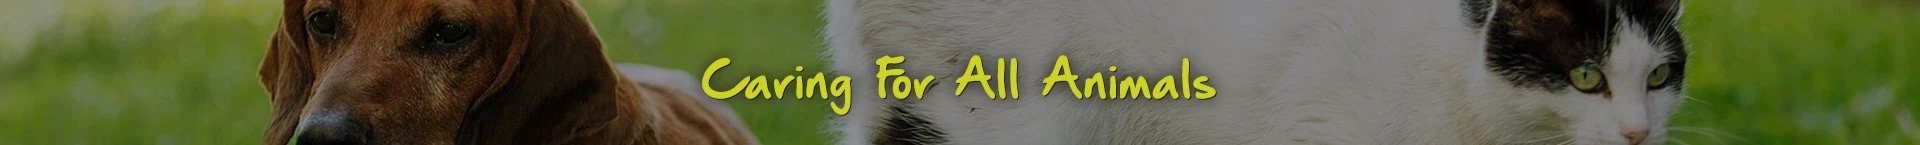 Care for all animals!